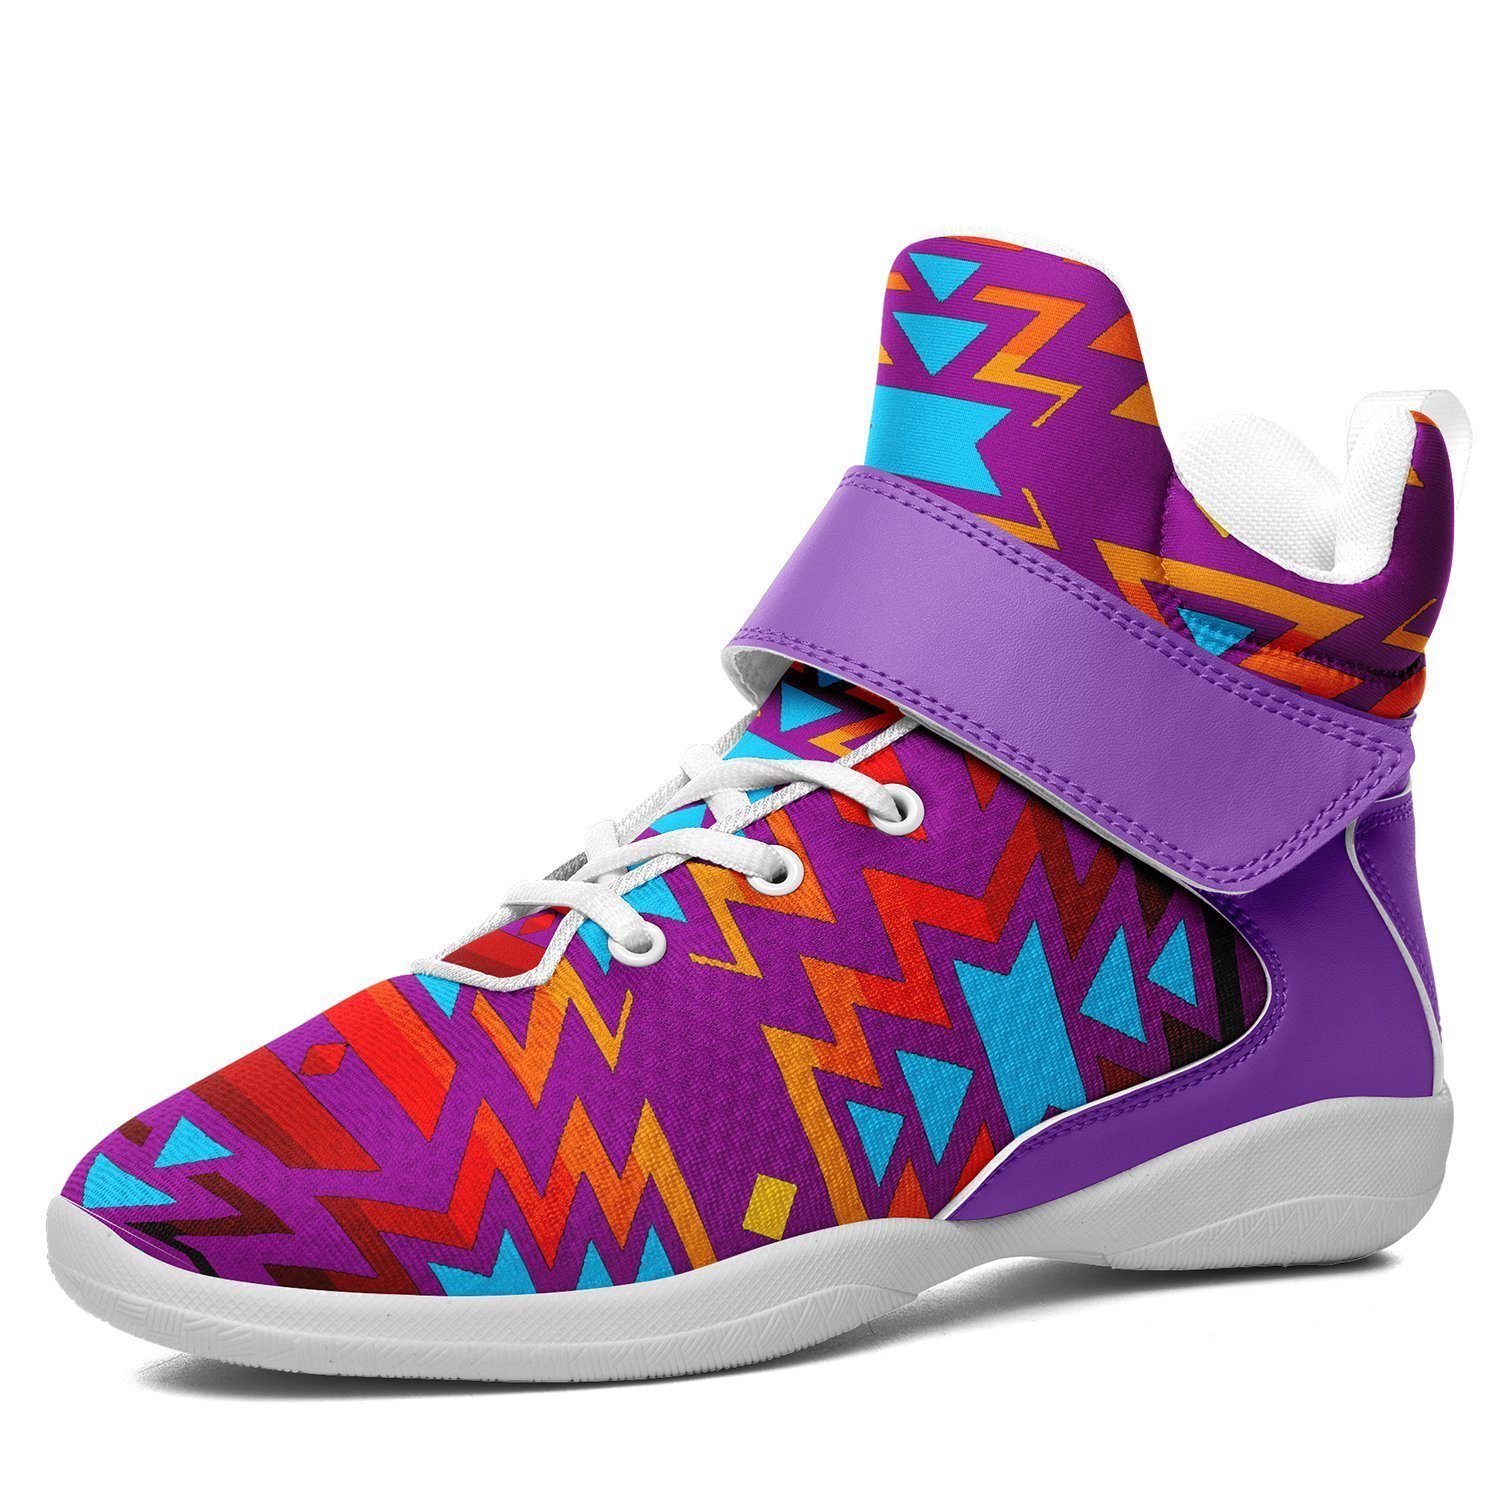 Fire Colors and Turquoise Purple Kid's Ipottaa Basketball / Sport High Top Shoes 49 Dzine US Child 12.5 / EUR 30 White Sole with Lavender Strap 